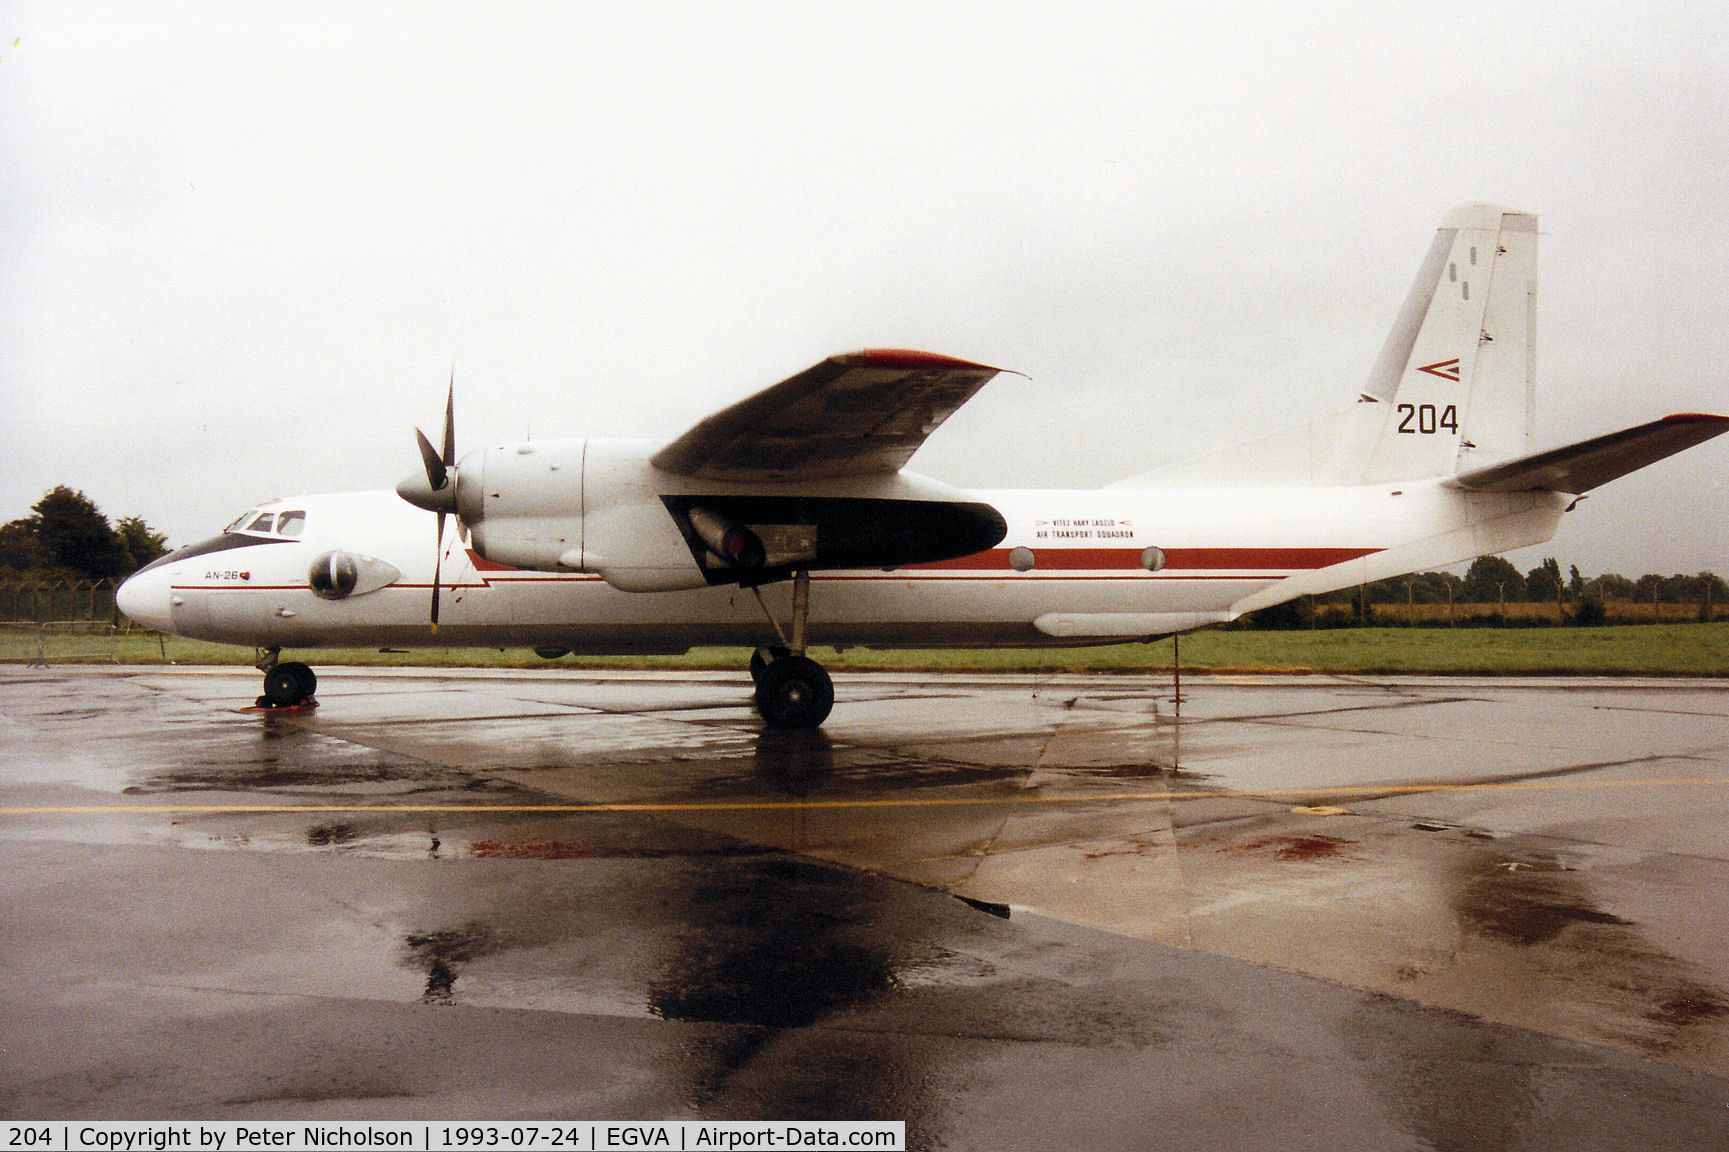 204, Antonov An-26 C/N 2204, An-26 Curl of the Szolnok Air Transport Squadron of the Hungarian Air Force on display at the 1993 Intnl Air Tattoo at RAF Fairford.